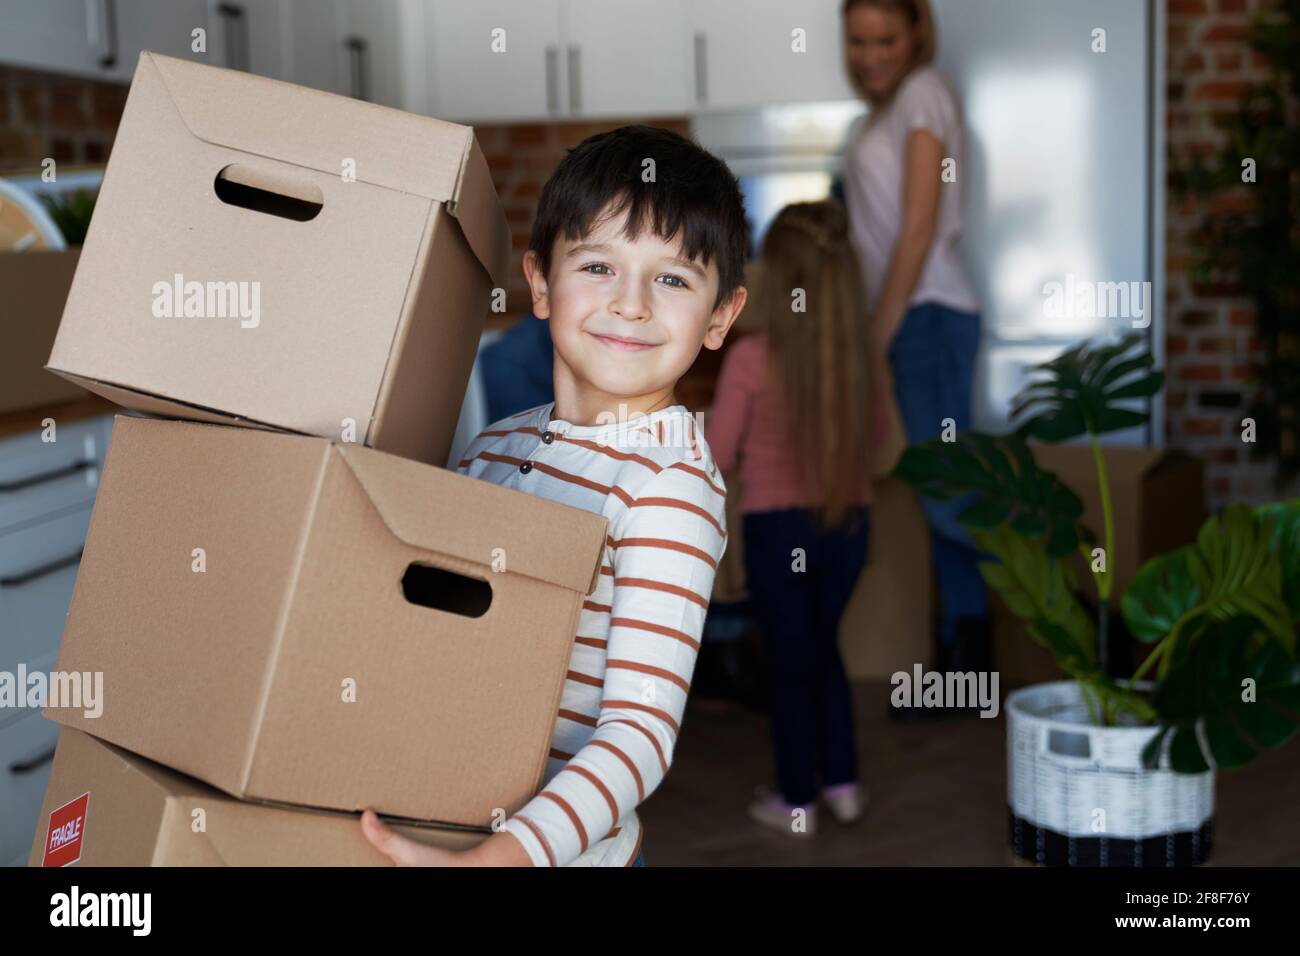 Portrait of smiling boy holding a cardboard box Stock Photo